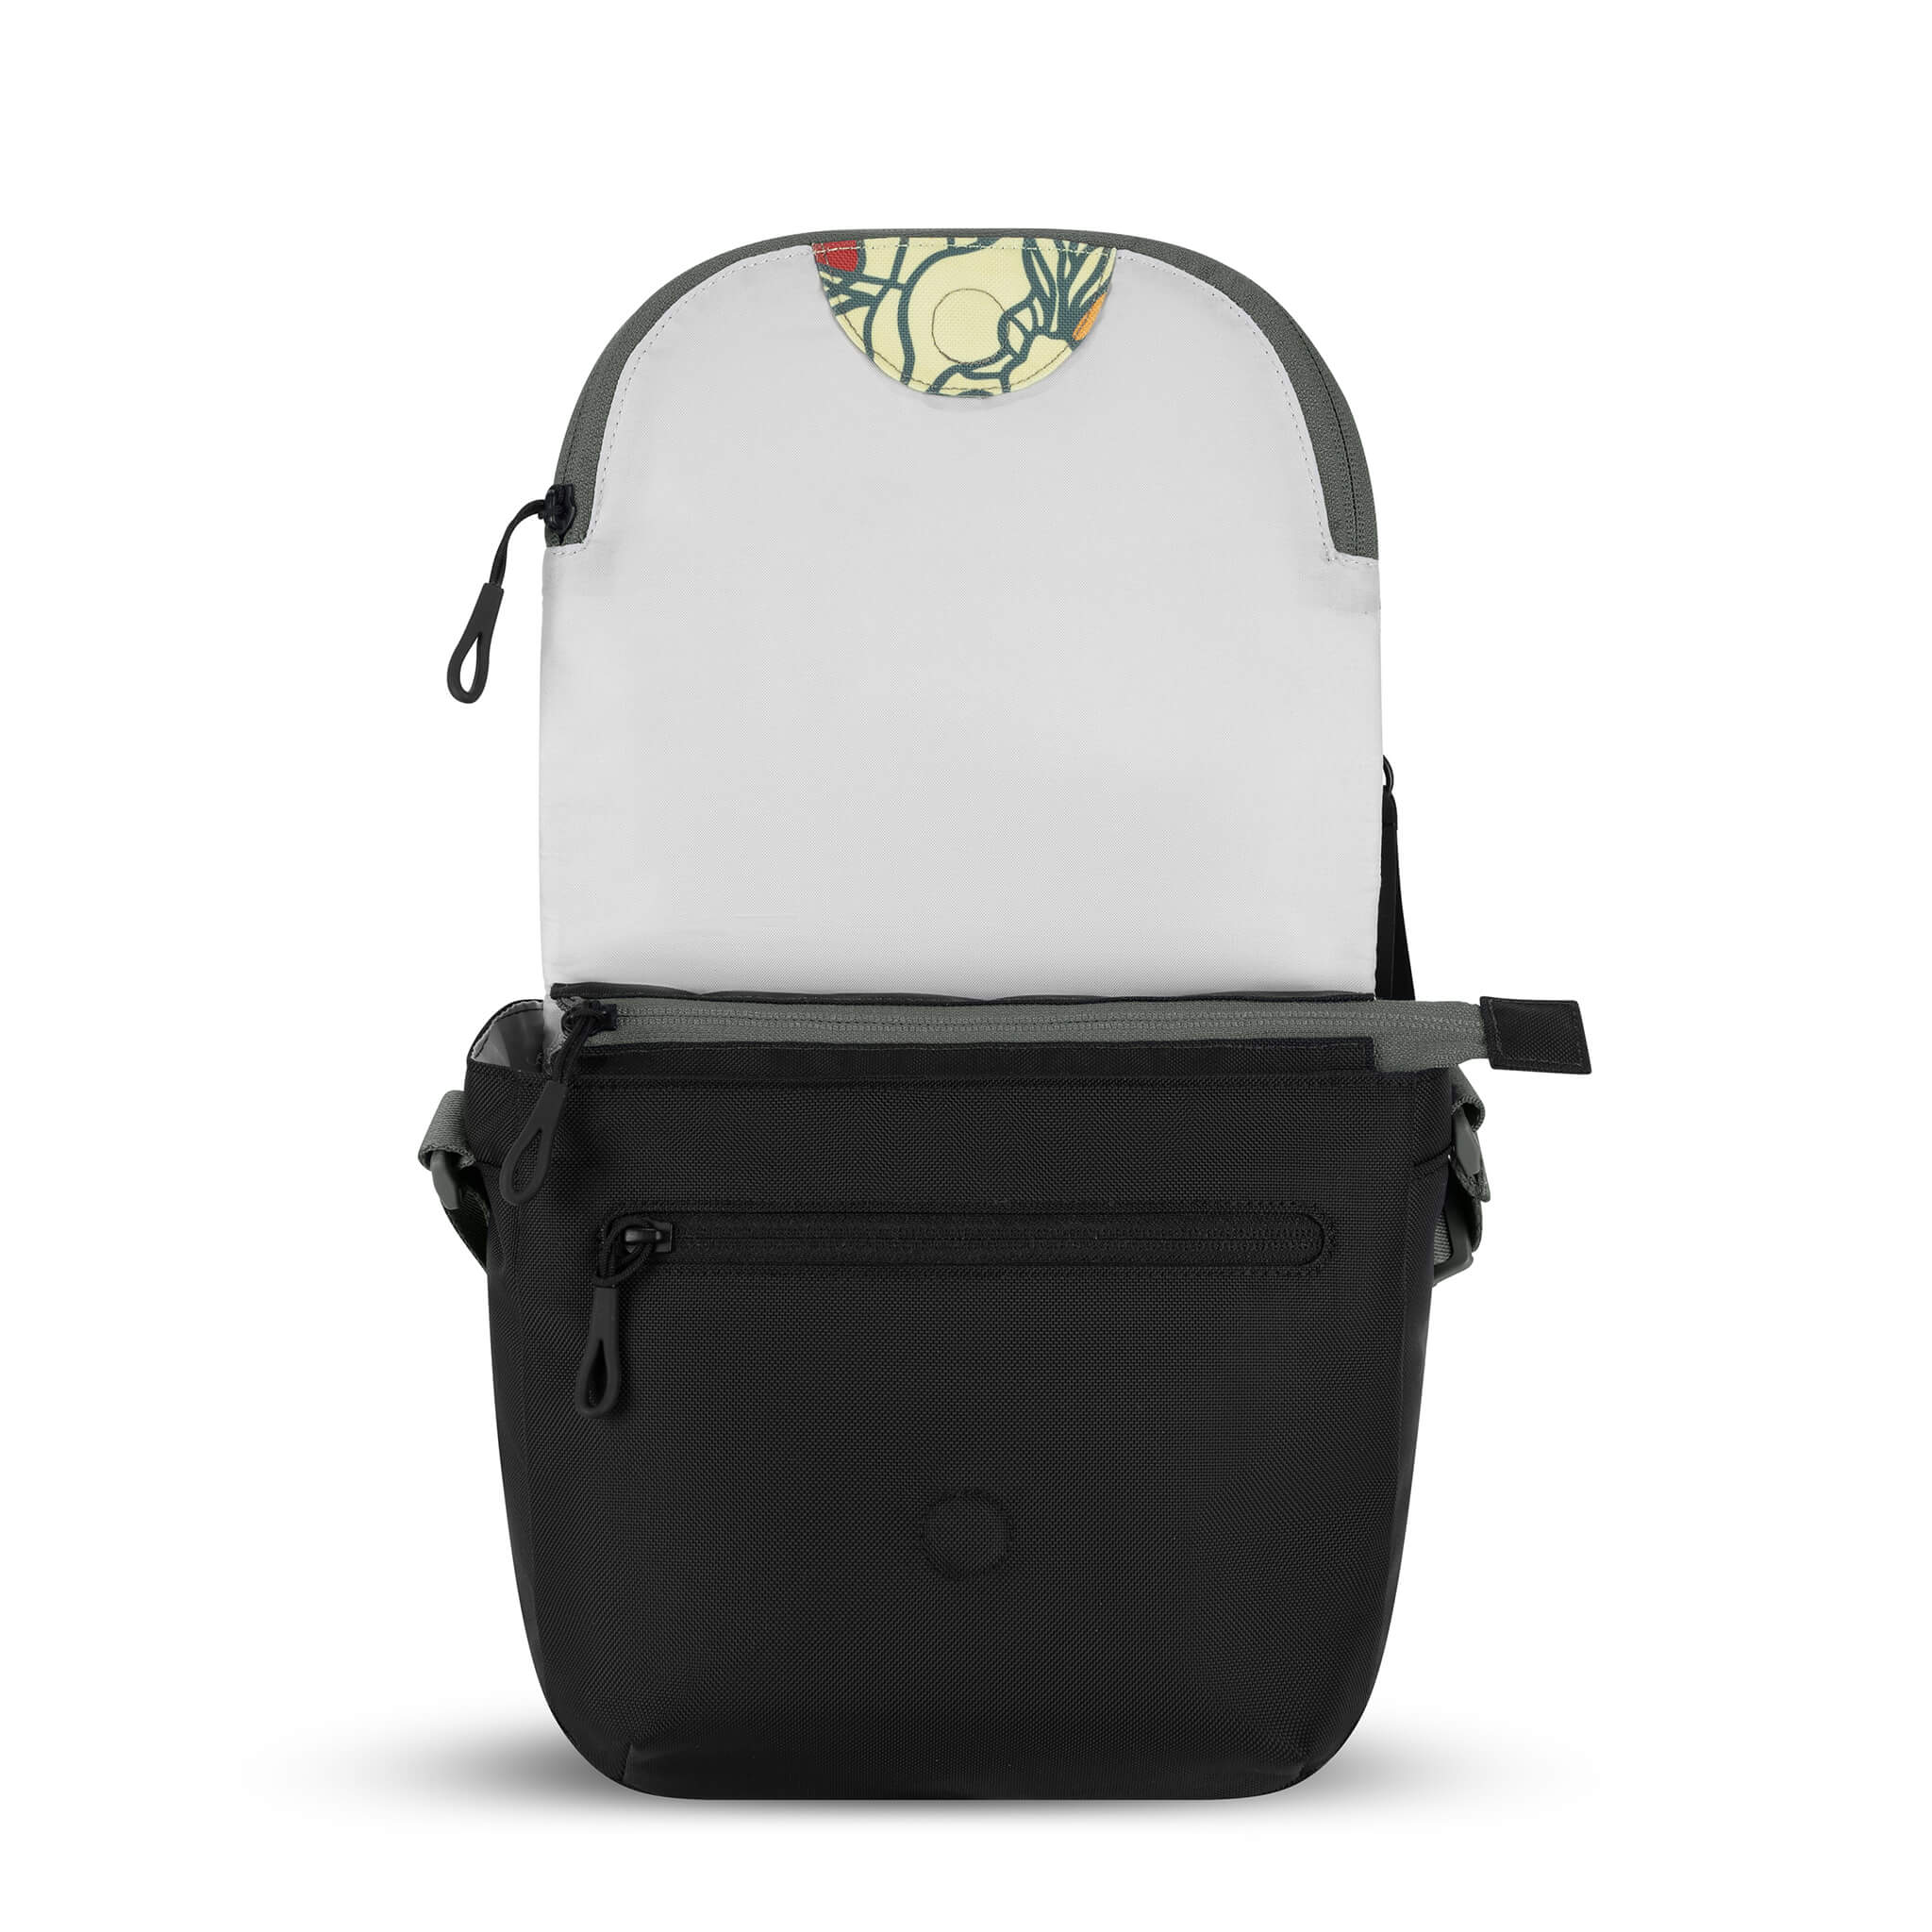 View of Sherpani satchel messenger bag, the Milli in Fiori, with main flap open to reveal a brimmed zipper pocket and magnetic closure. 